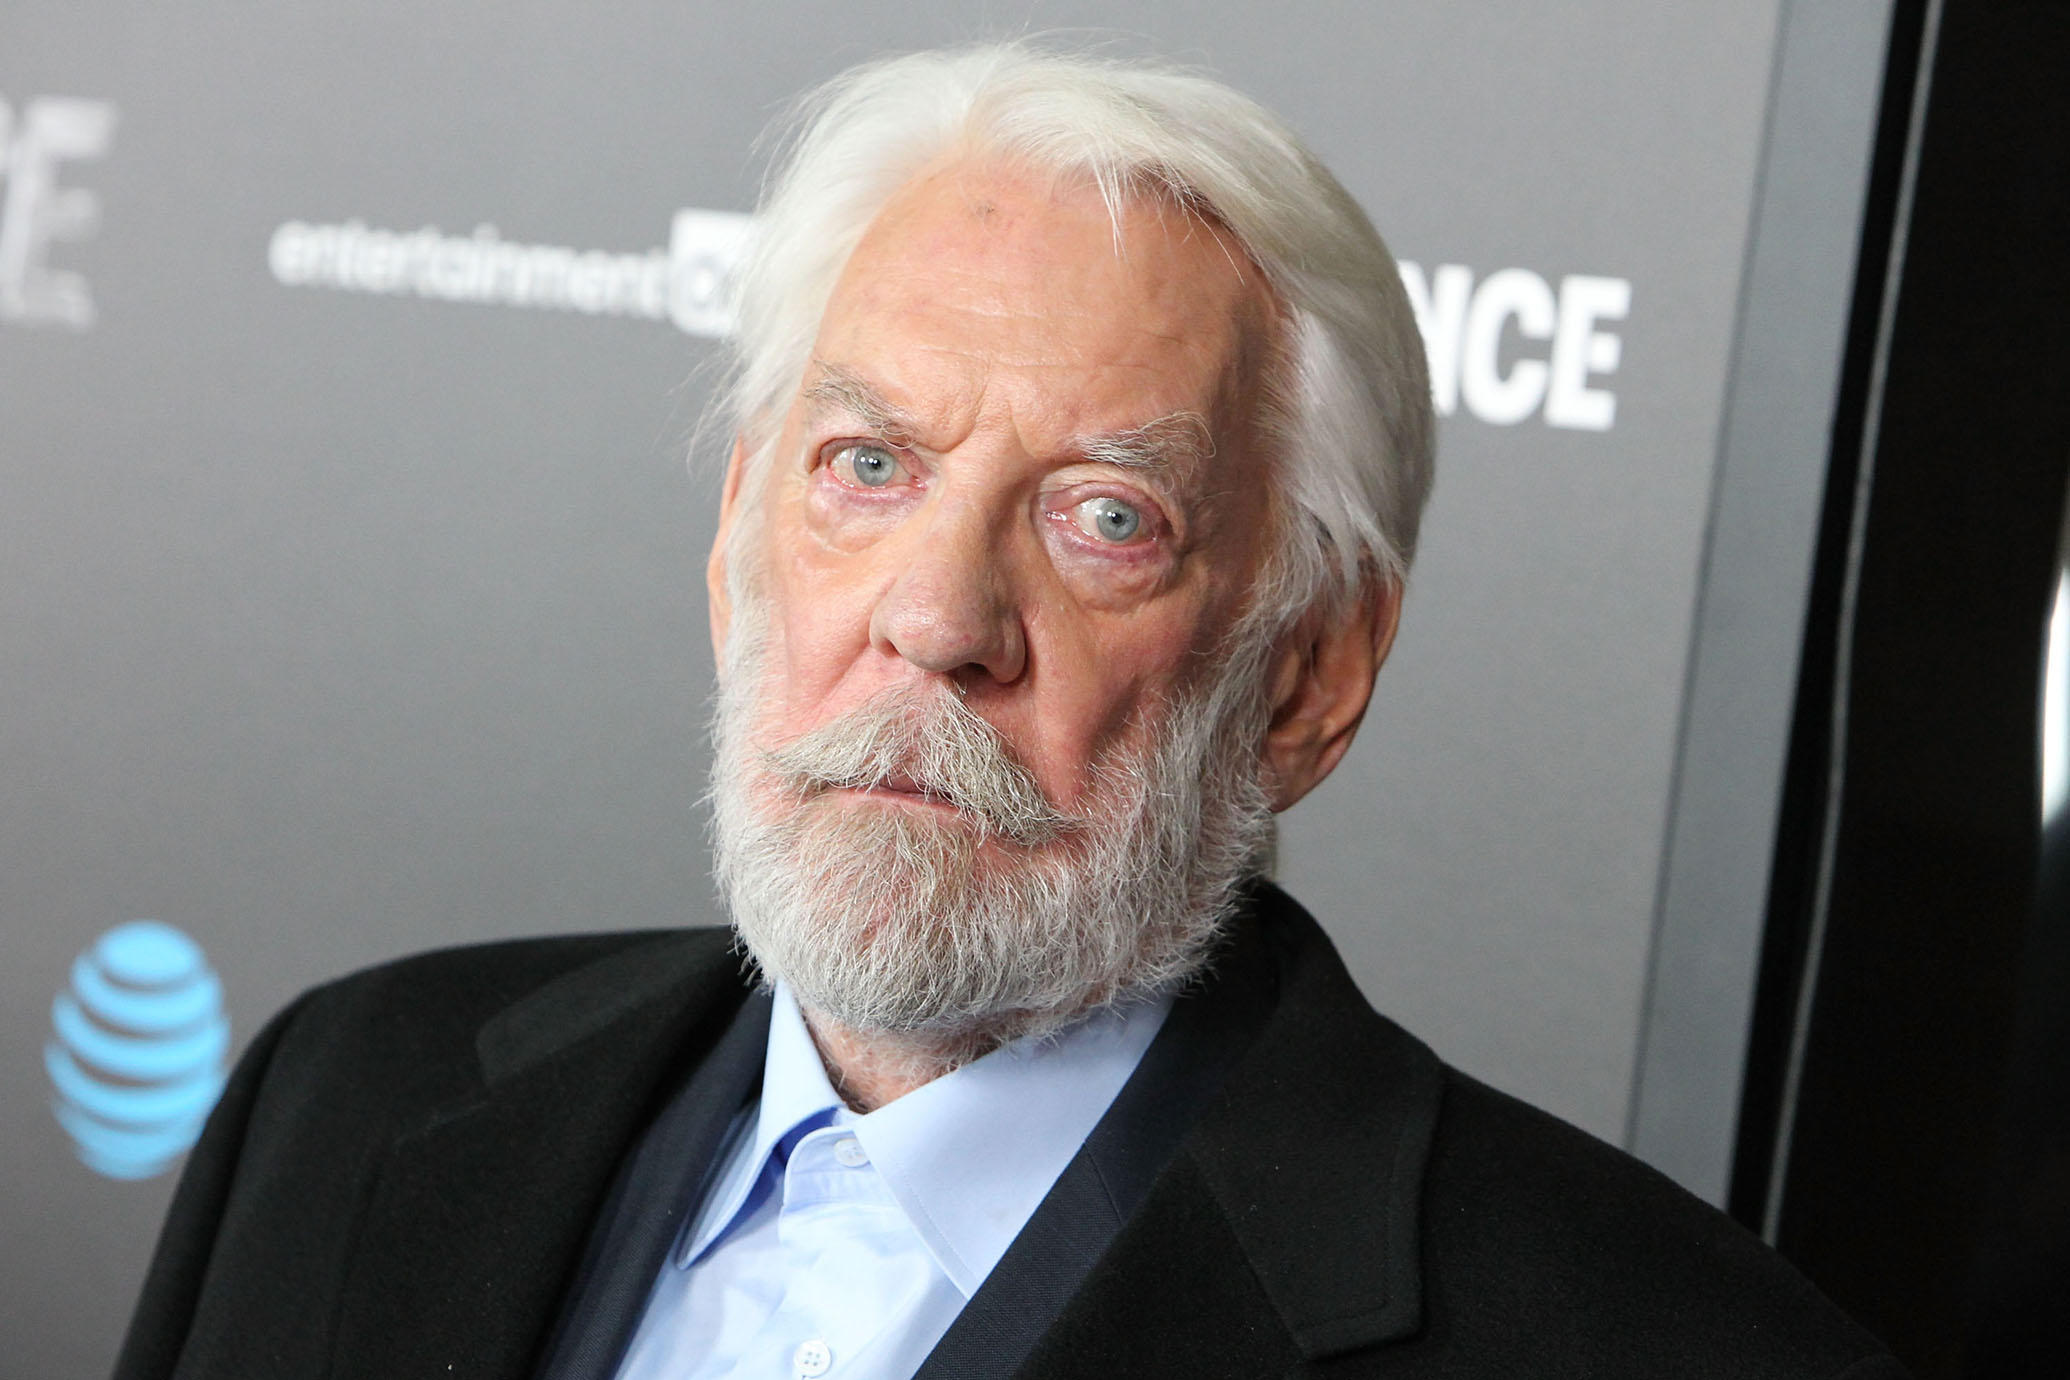 Hollywood Legend Donald Sutherland Joins the Sci-Fi Film ‘Ad Astra’